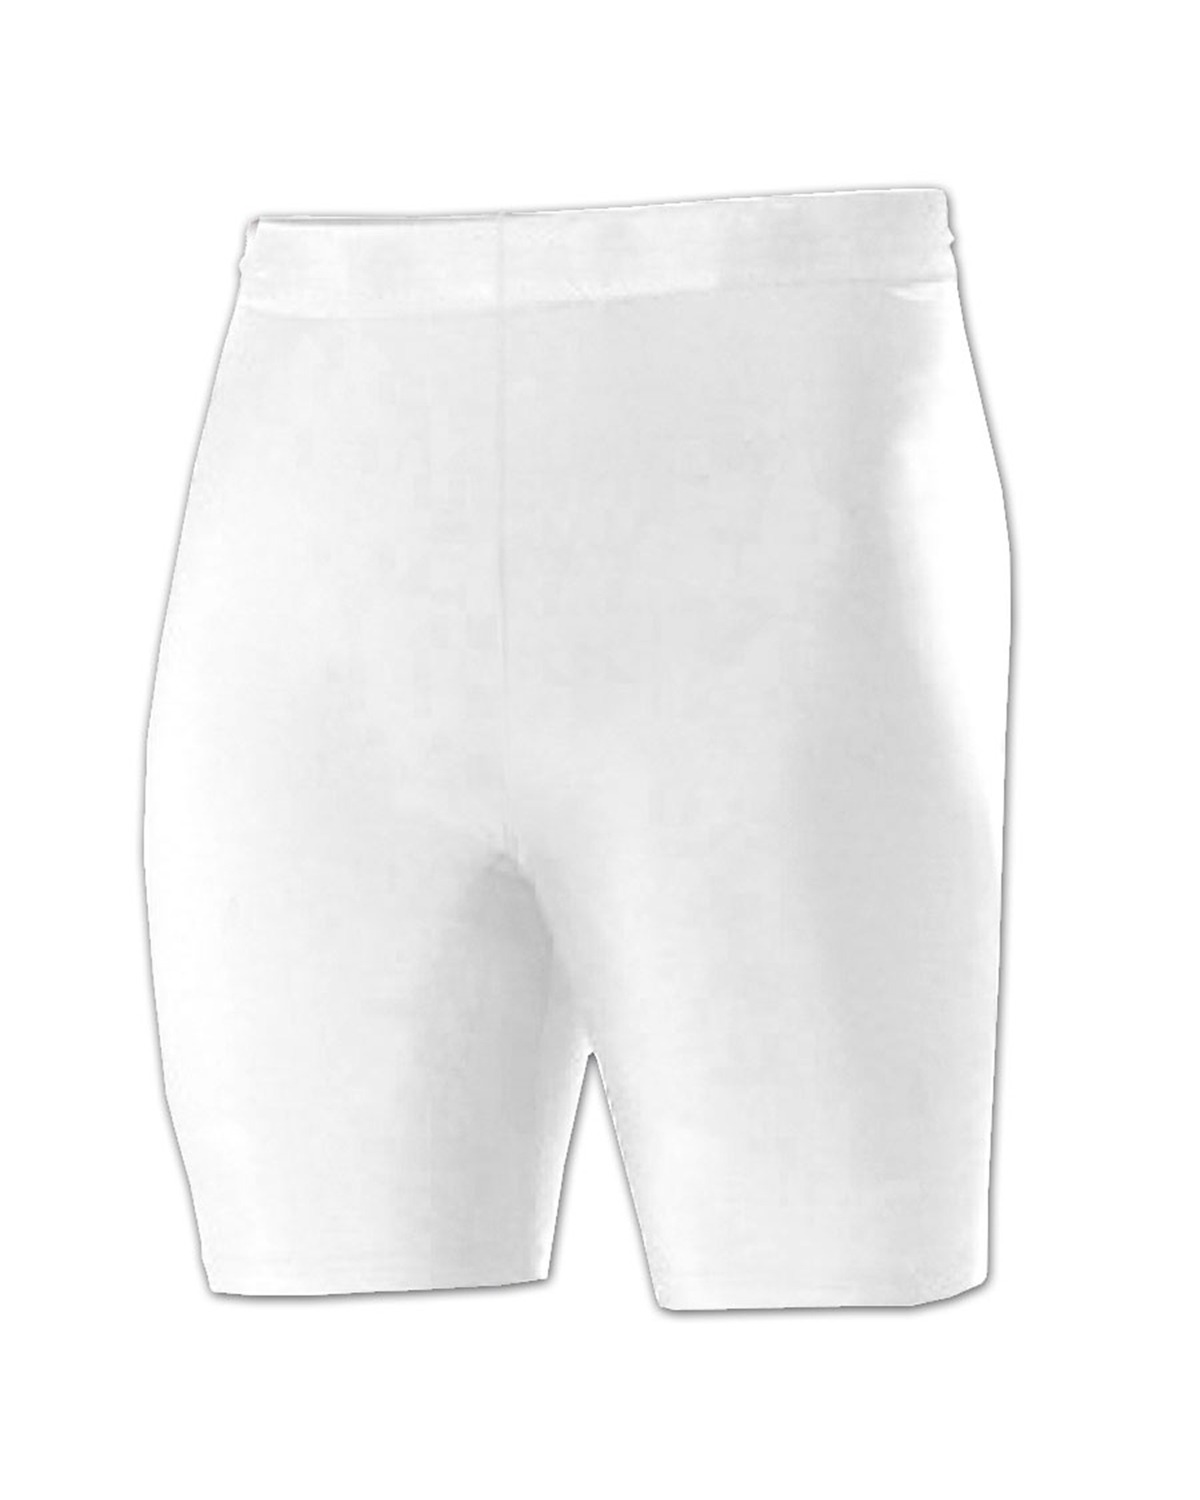 A4 NW5313 Ladies' 4 Inseam Compression Shorts